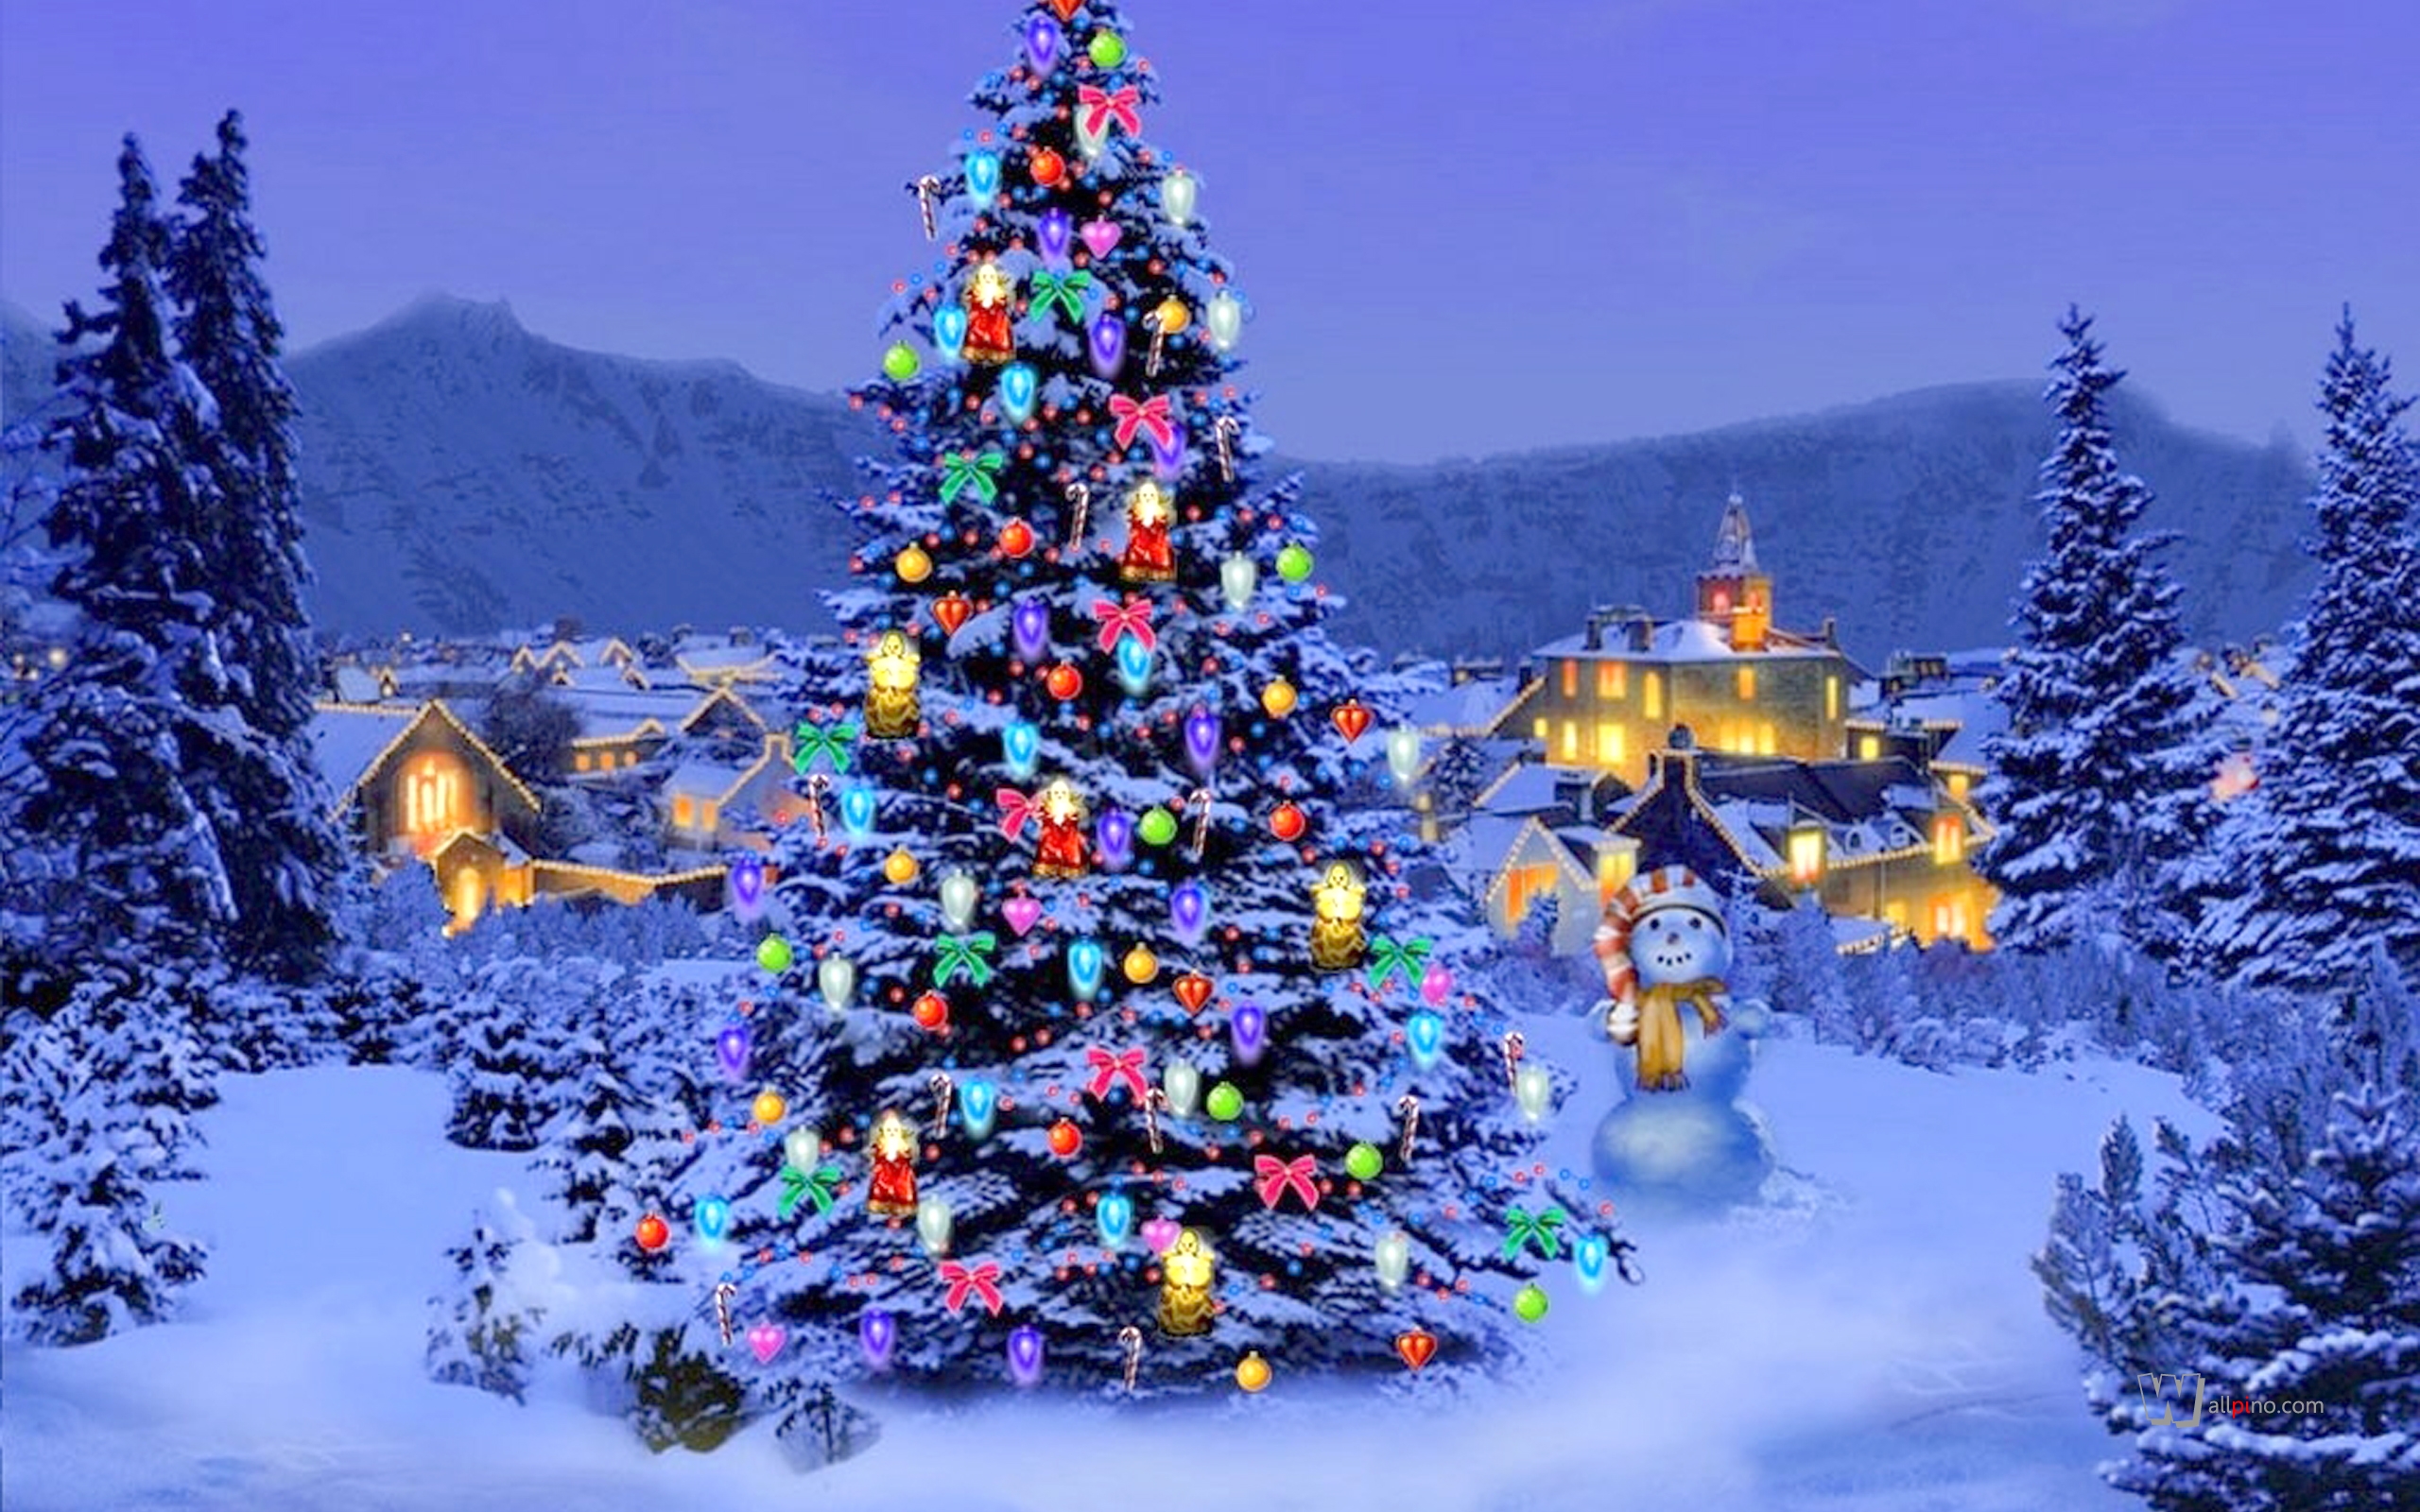 Christmas Tree In The Mountains Wallpaper